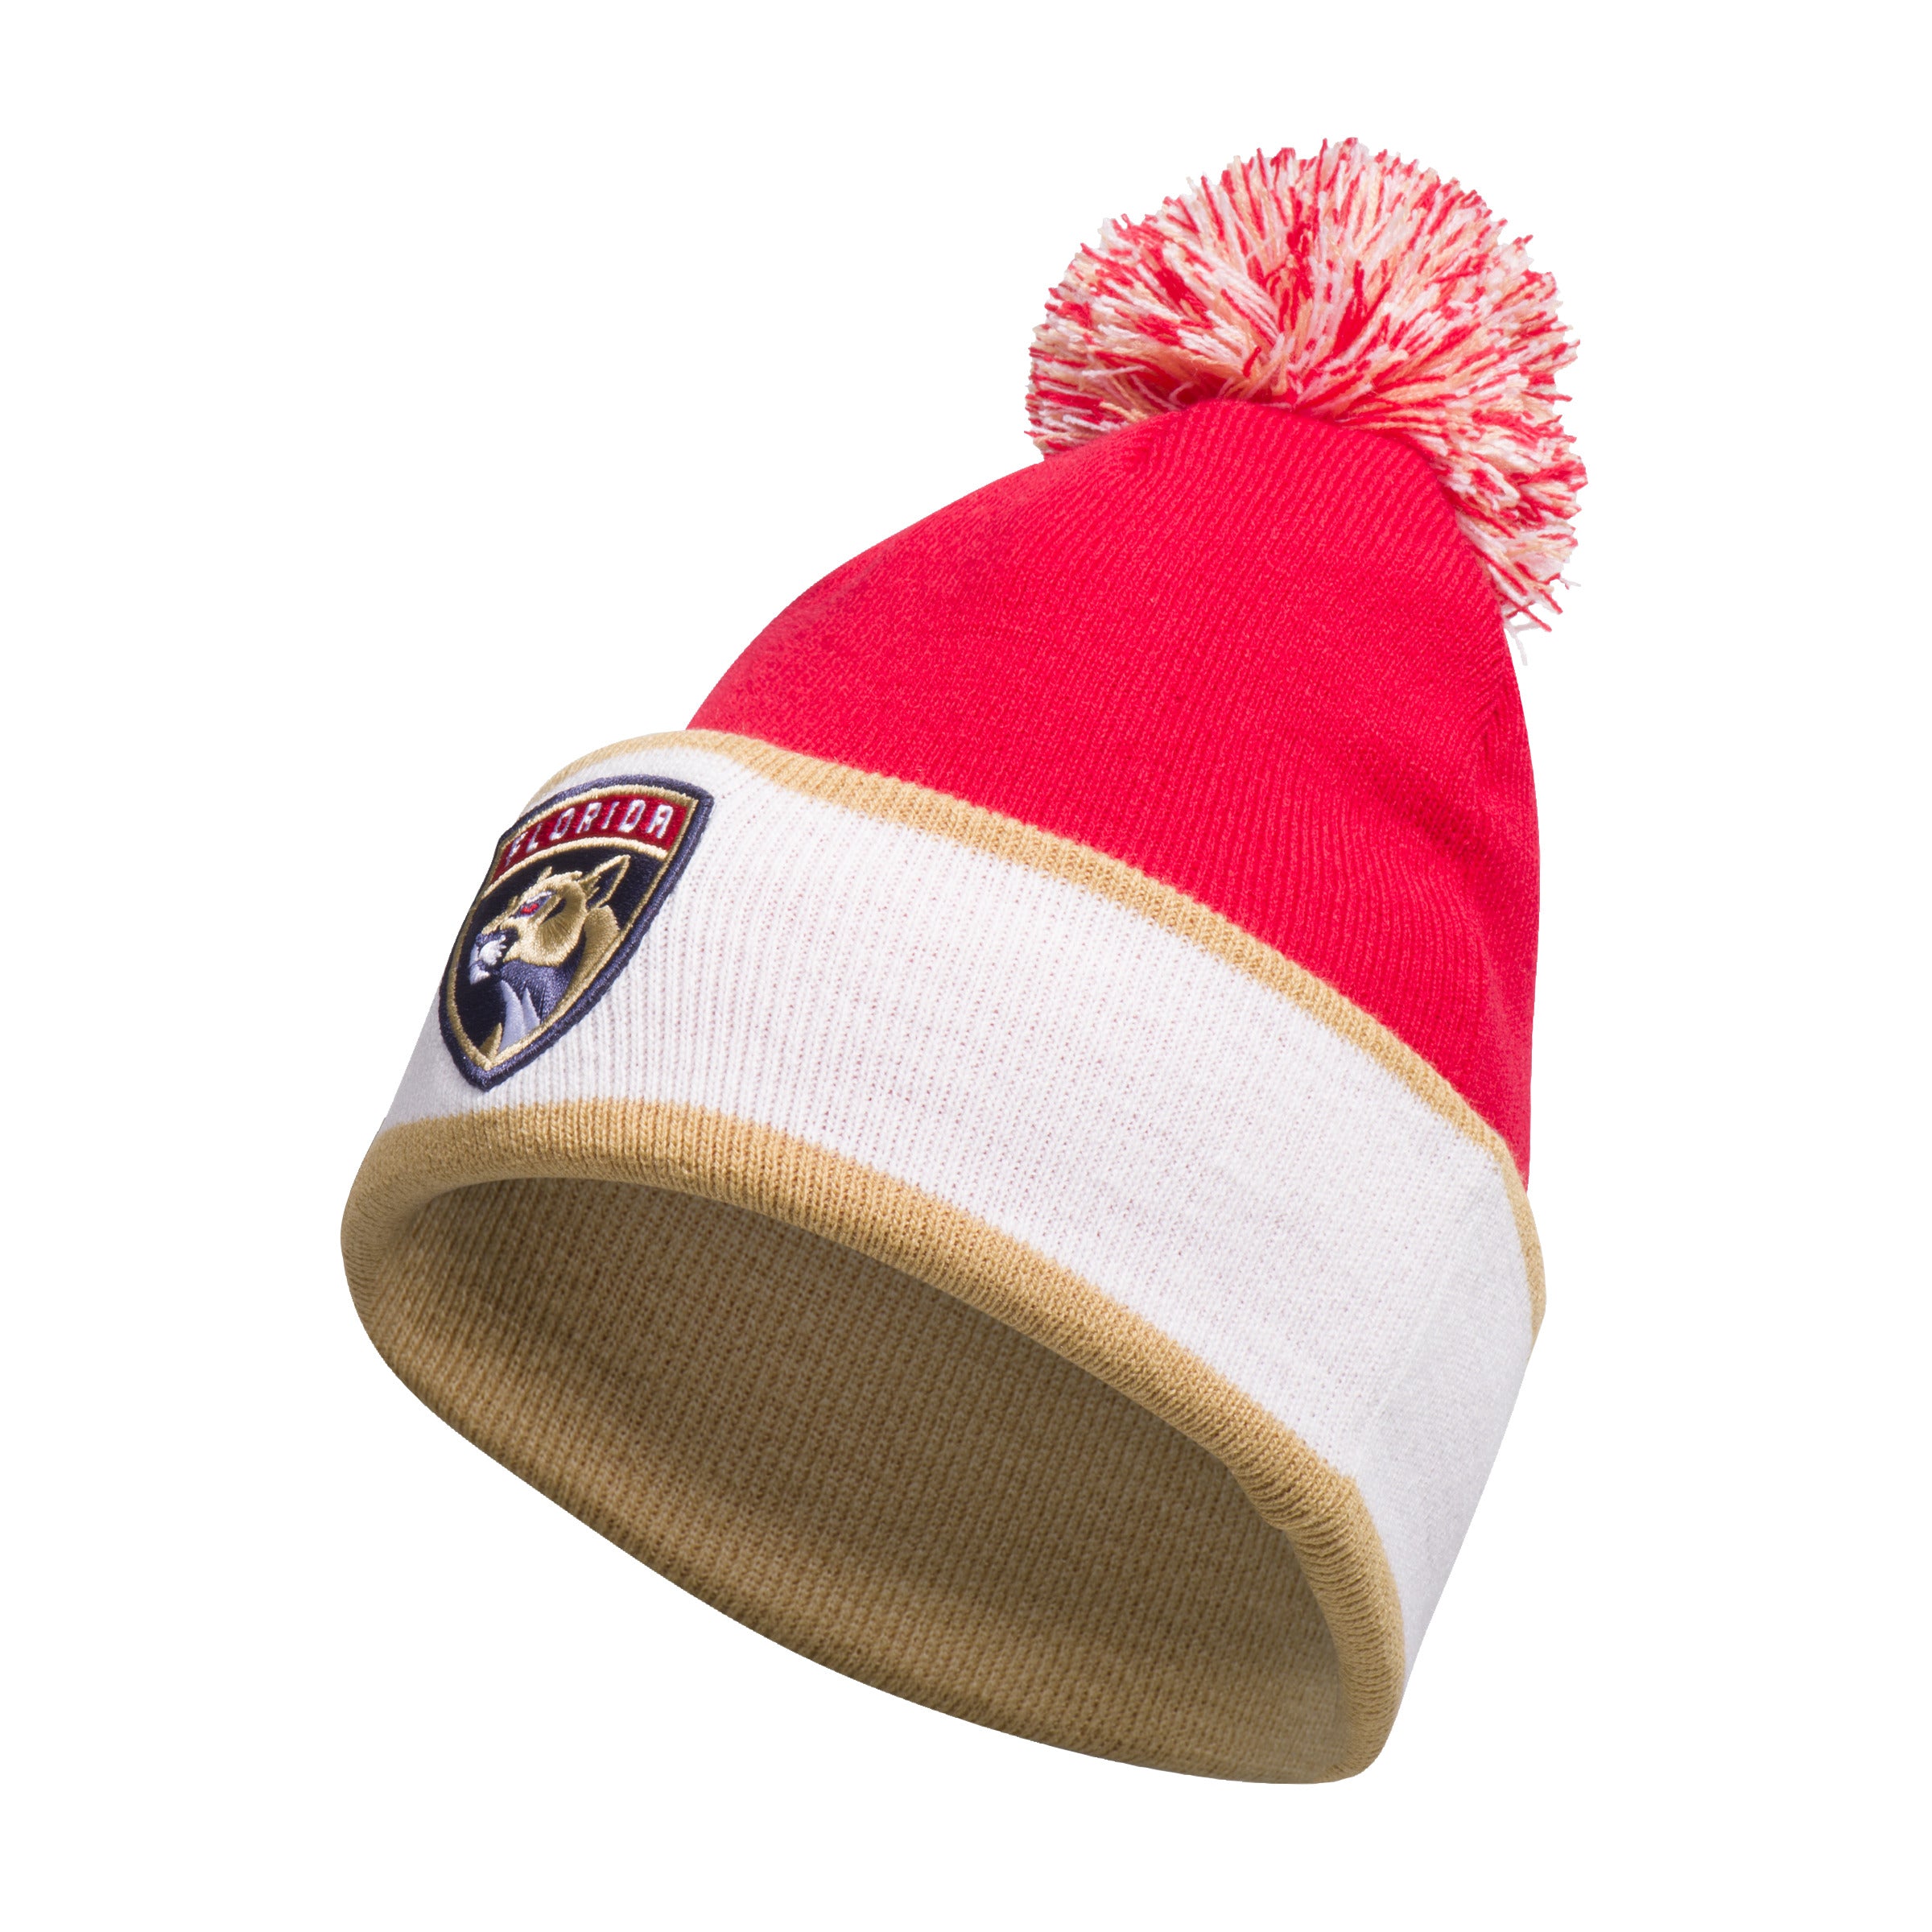 Florida Panthers adidas Home Jersey Cuffed Knit Pom Pom Beanie - Red/White